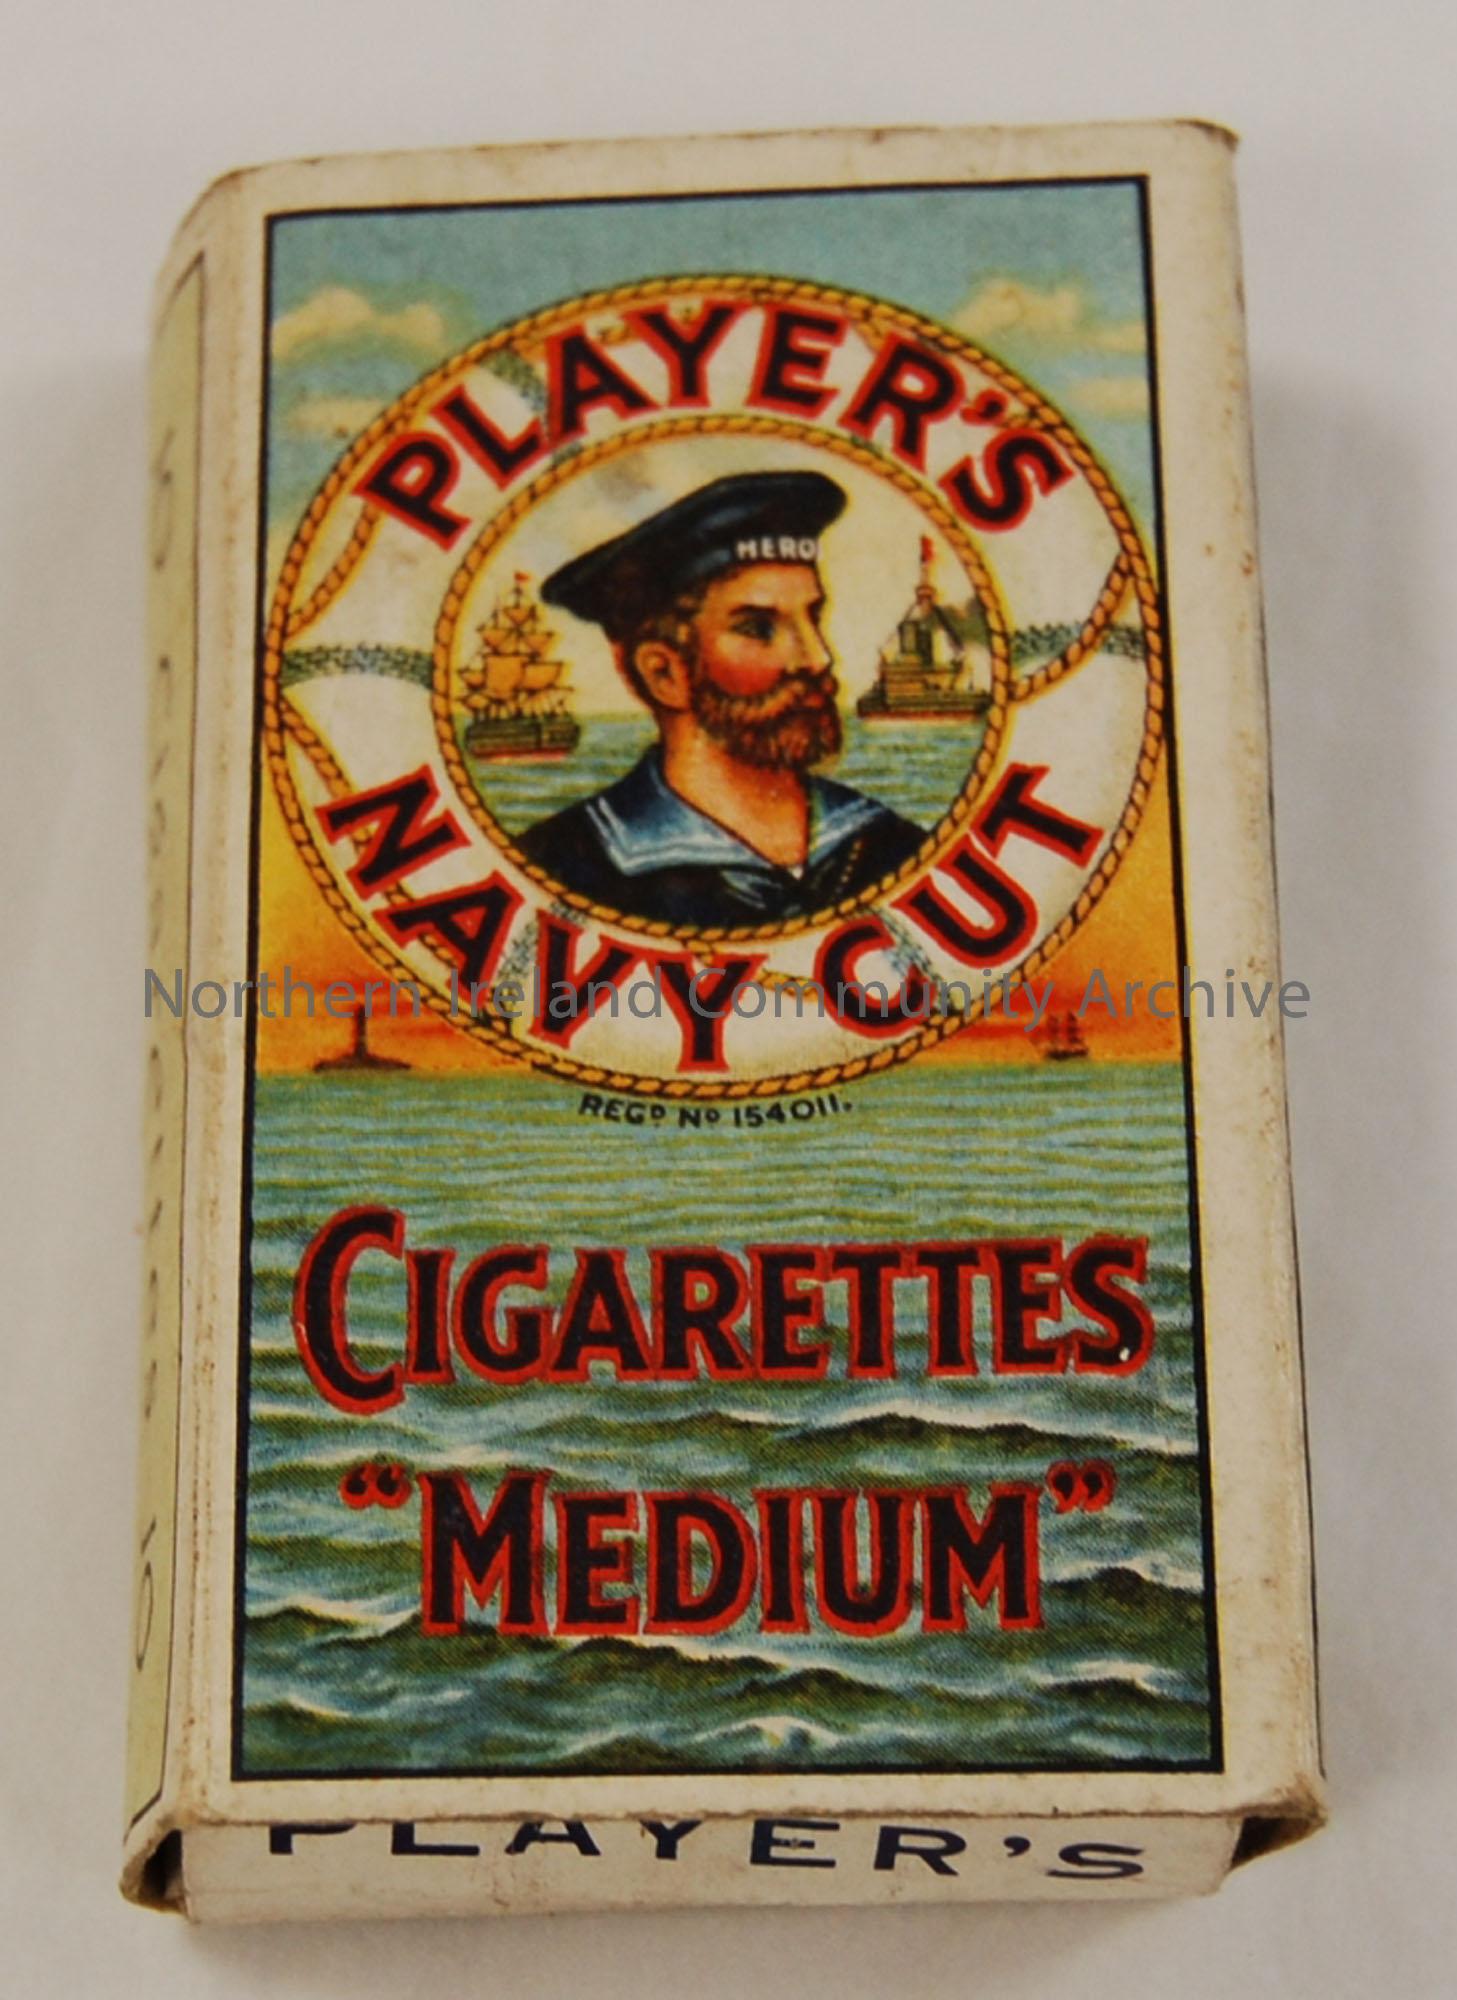 Player’s Navy cut cigarettes ‘medium’ Produced by John Player & Sons. Made in England.